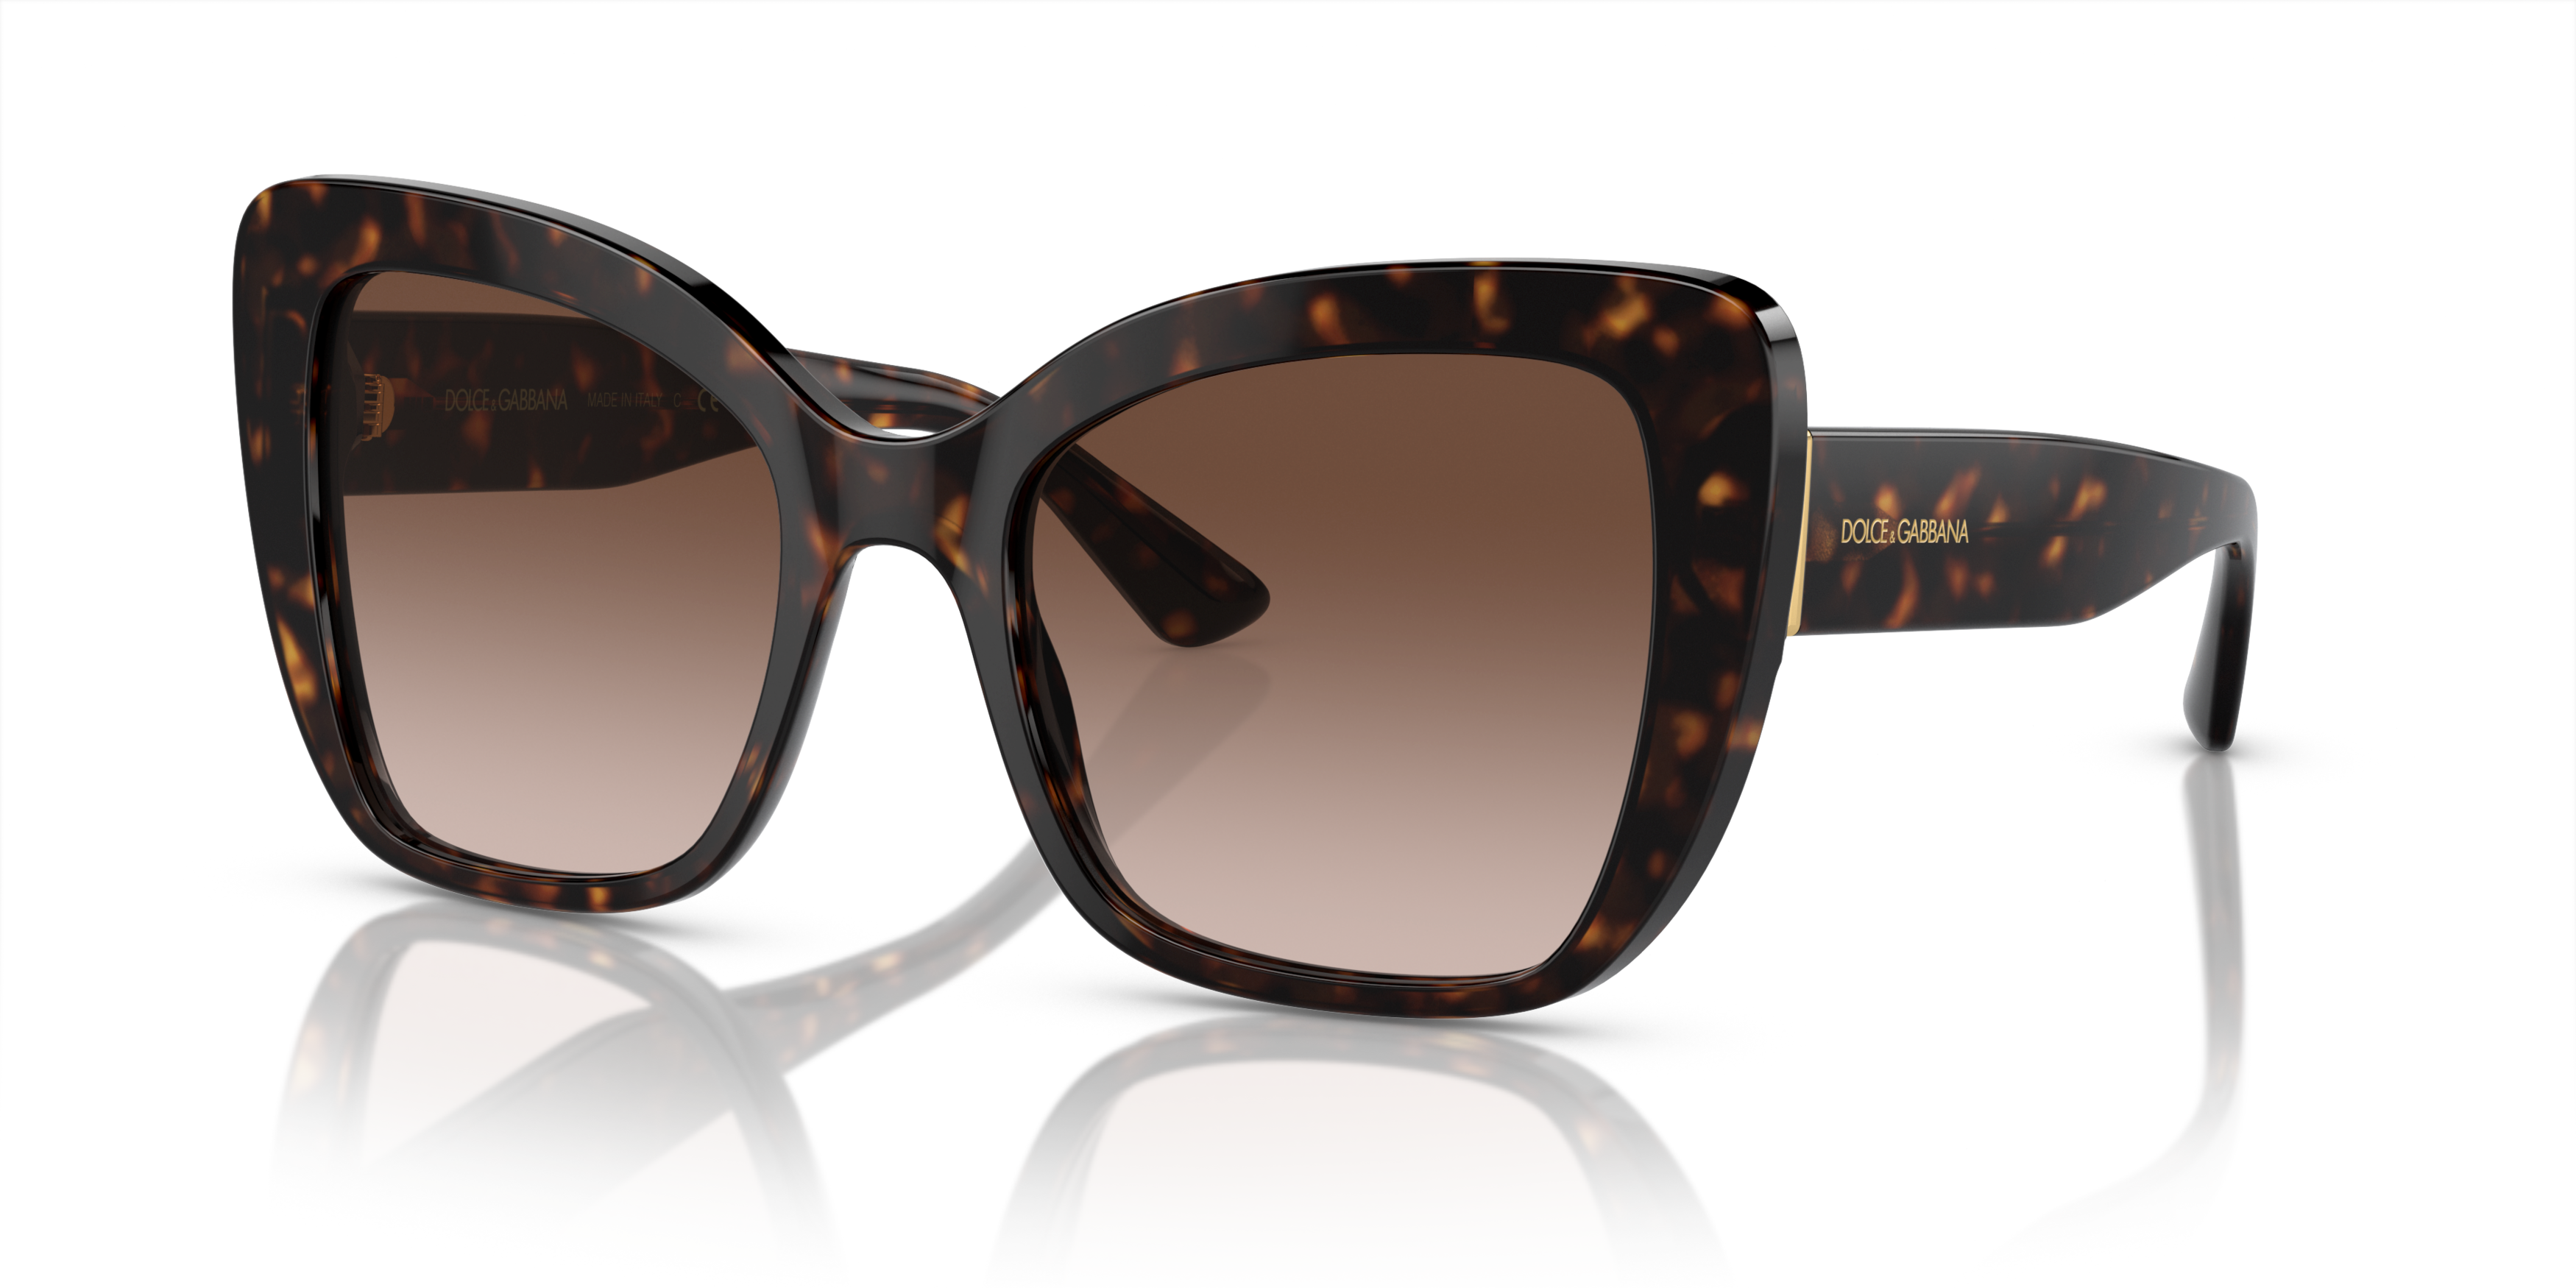 [products.image.angle_left01] DOLCE & GABBANA DG4348 502/13